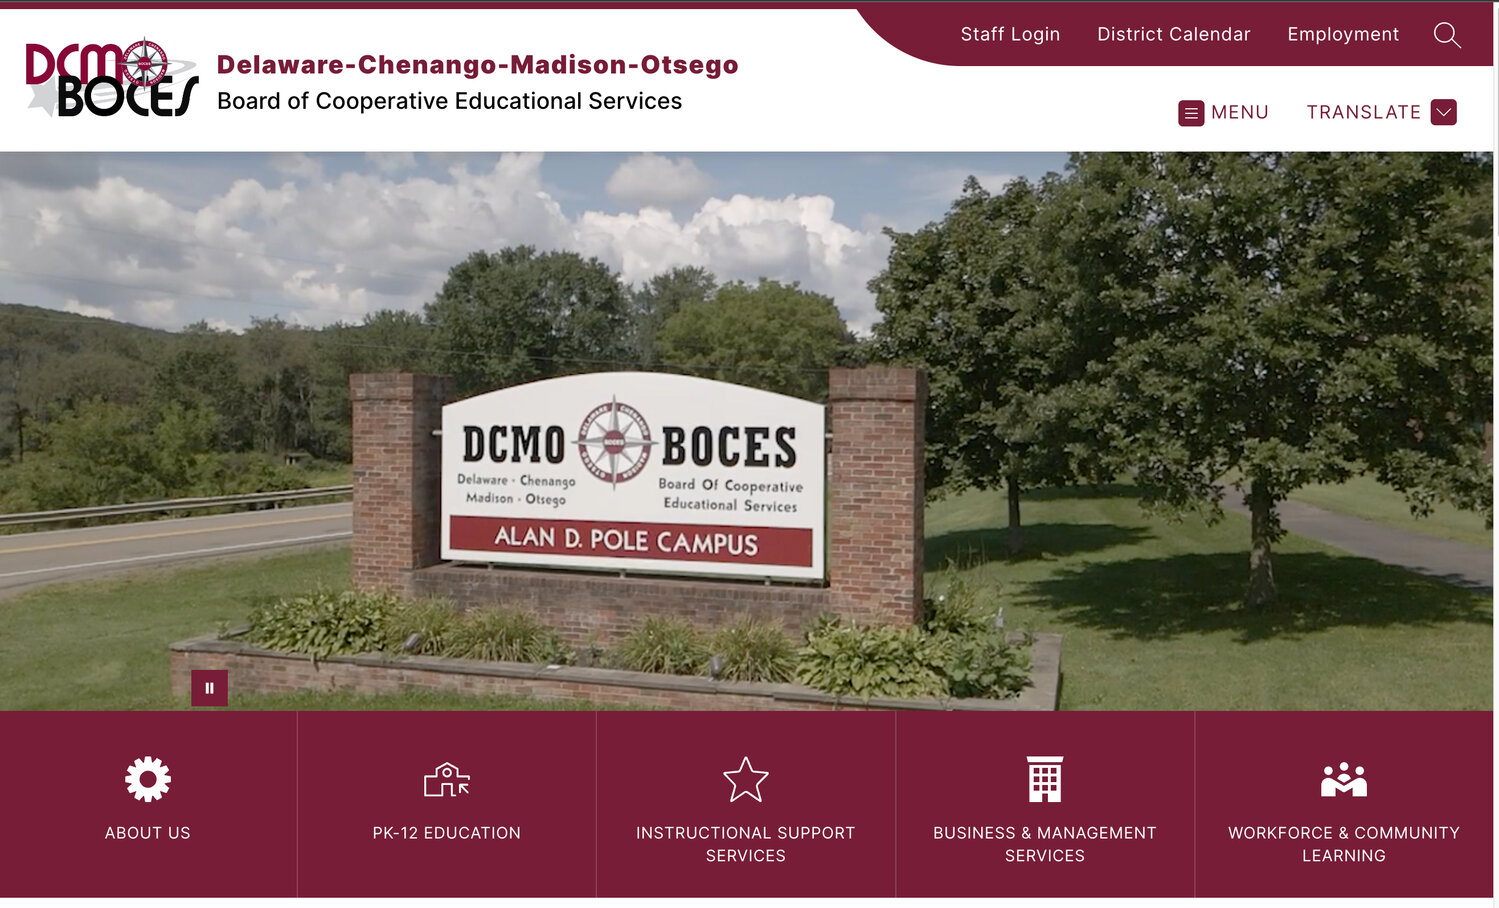 The landing page of the new DCMO BOCES website, launches Jan. 1.